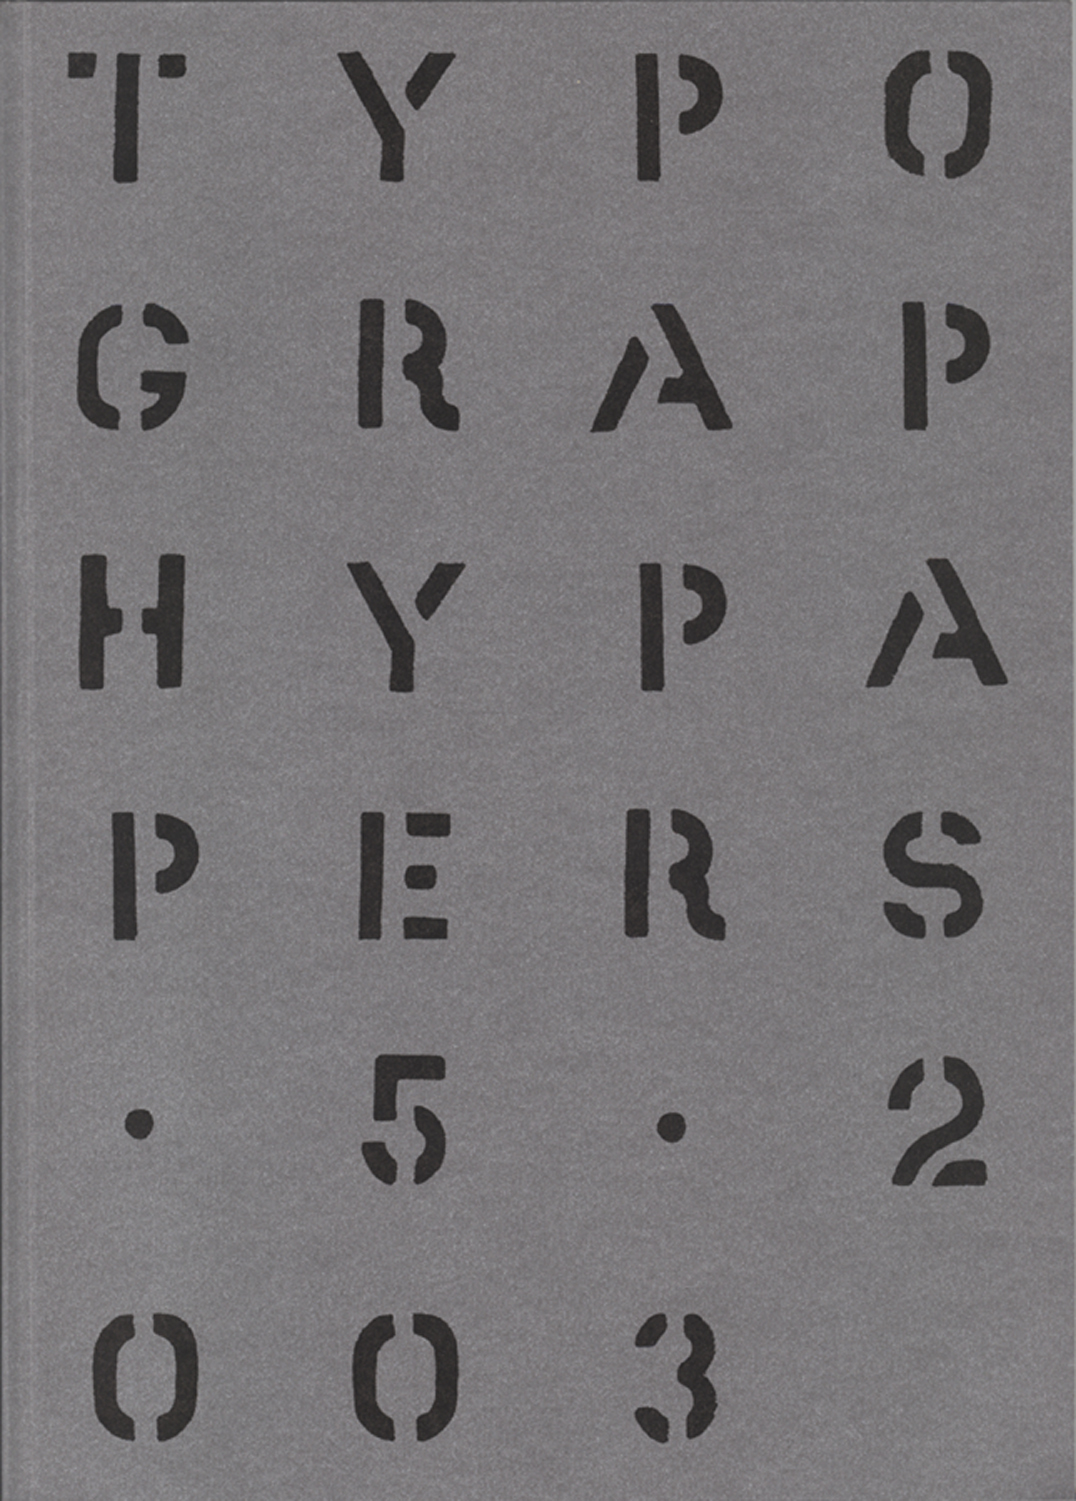 Publishing ‘Typography papers’